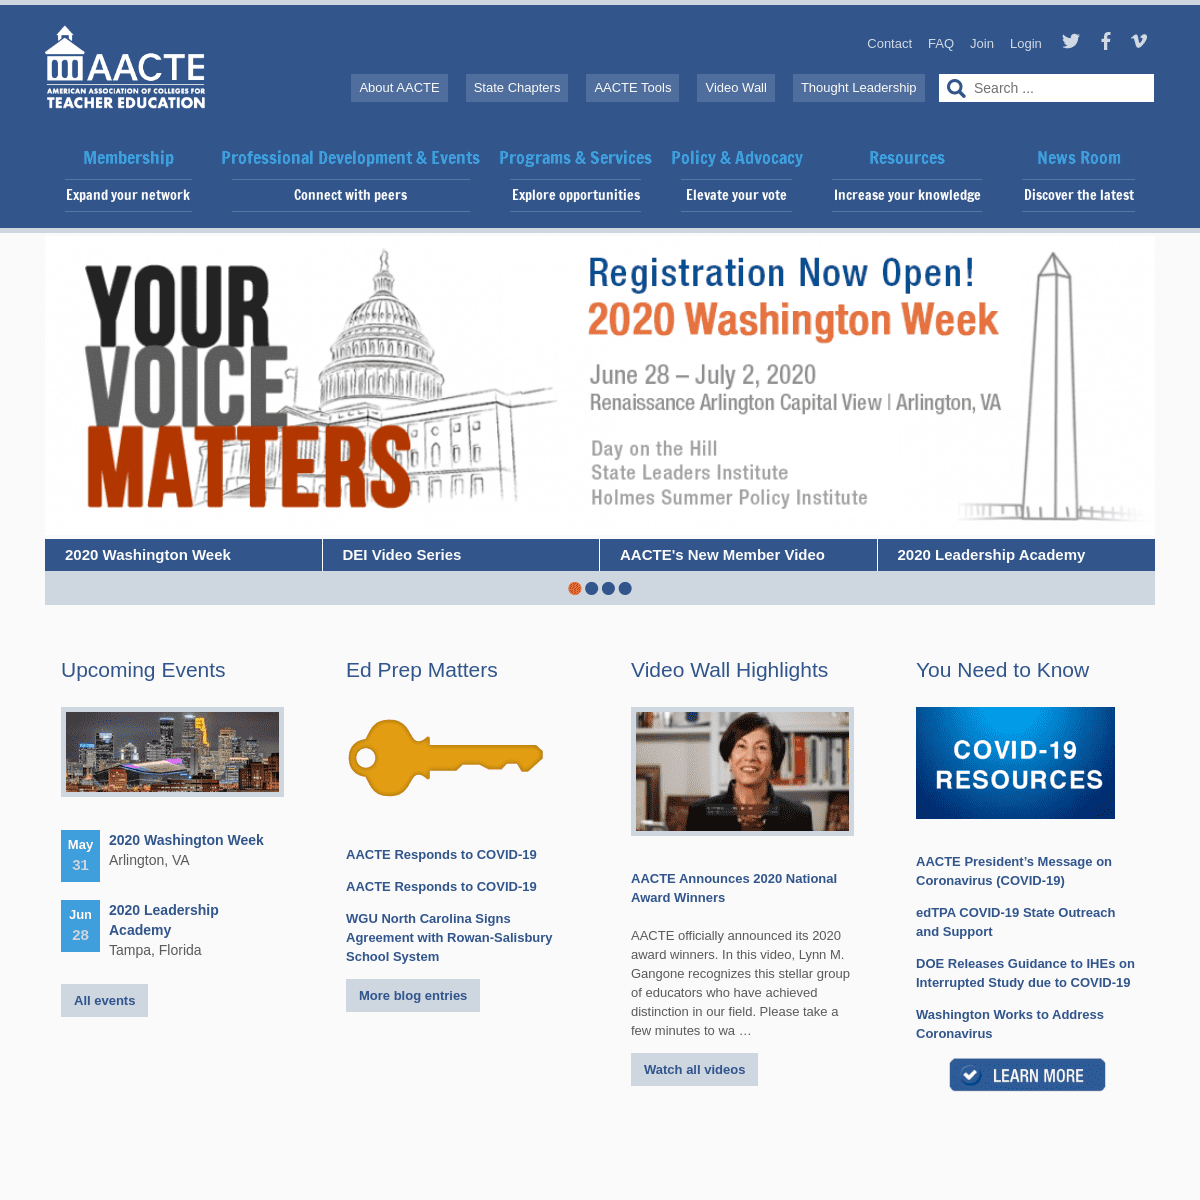 A complete backup of aacte.org